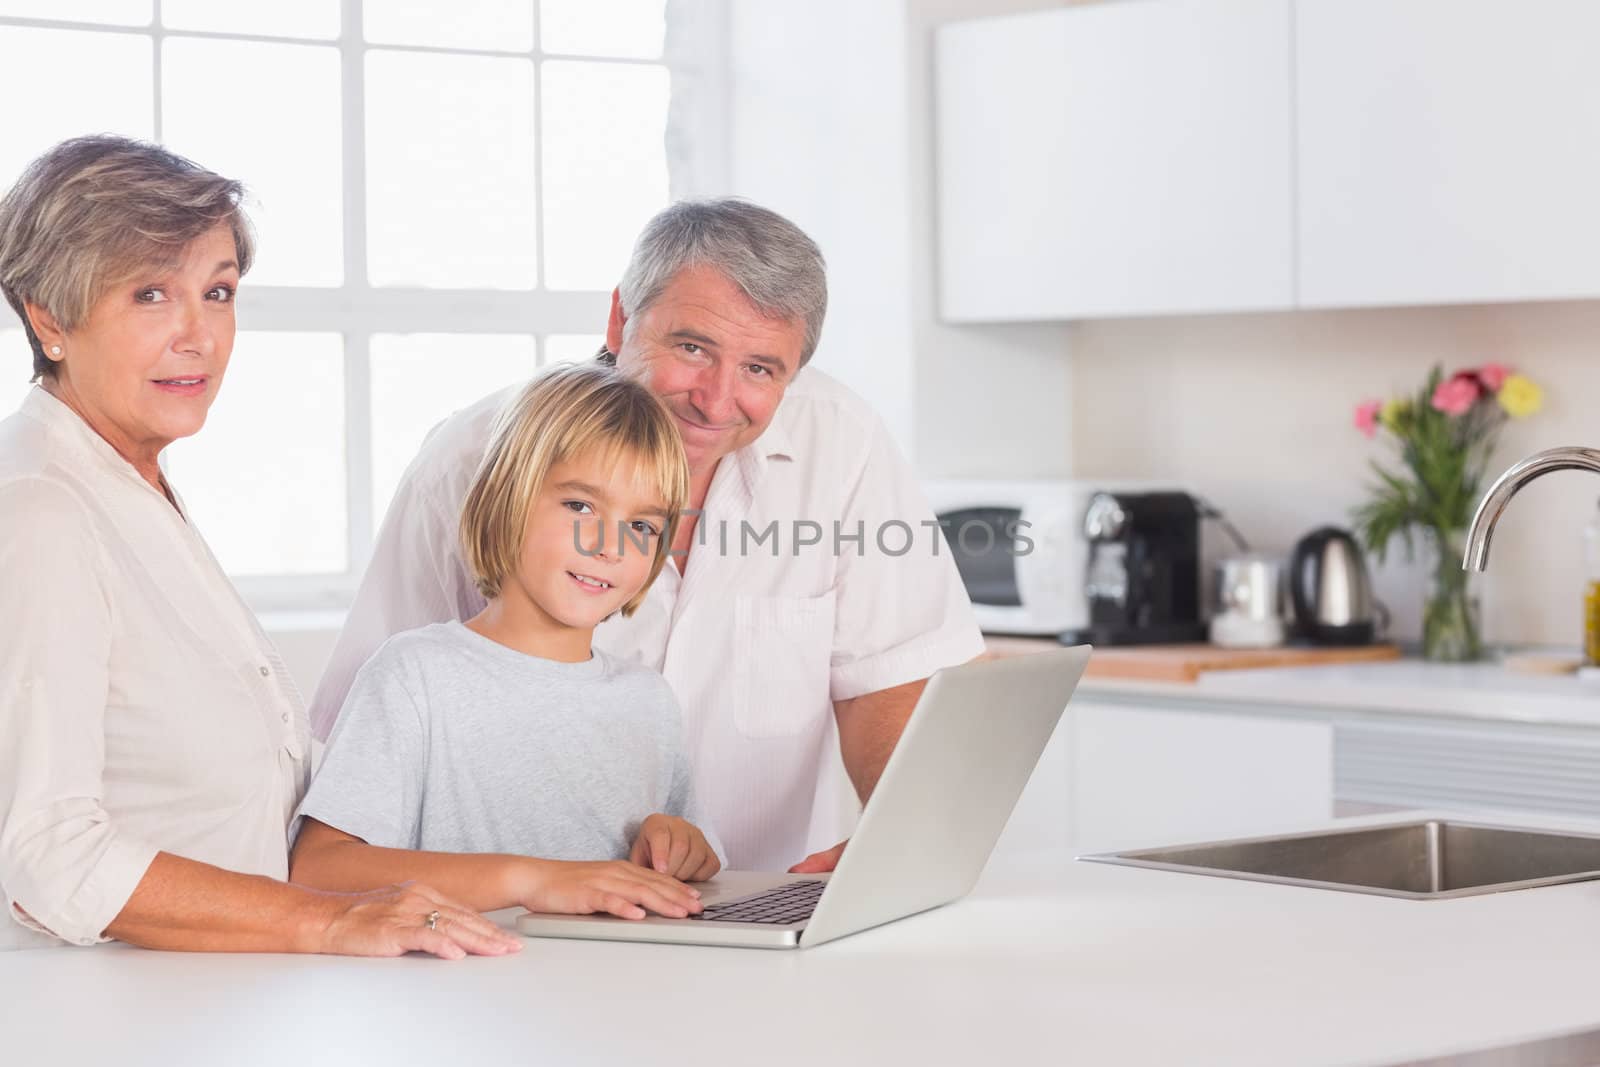 Child and grandparents looking at camera with a laptop in kitchen